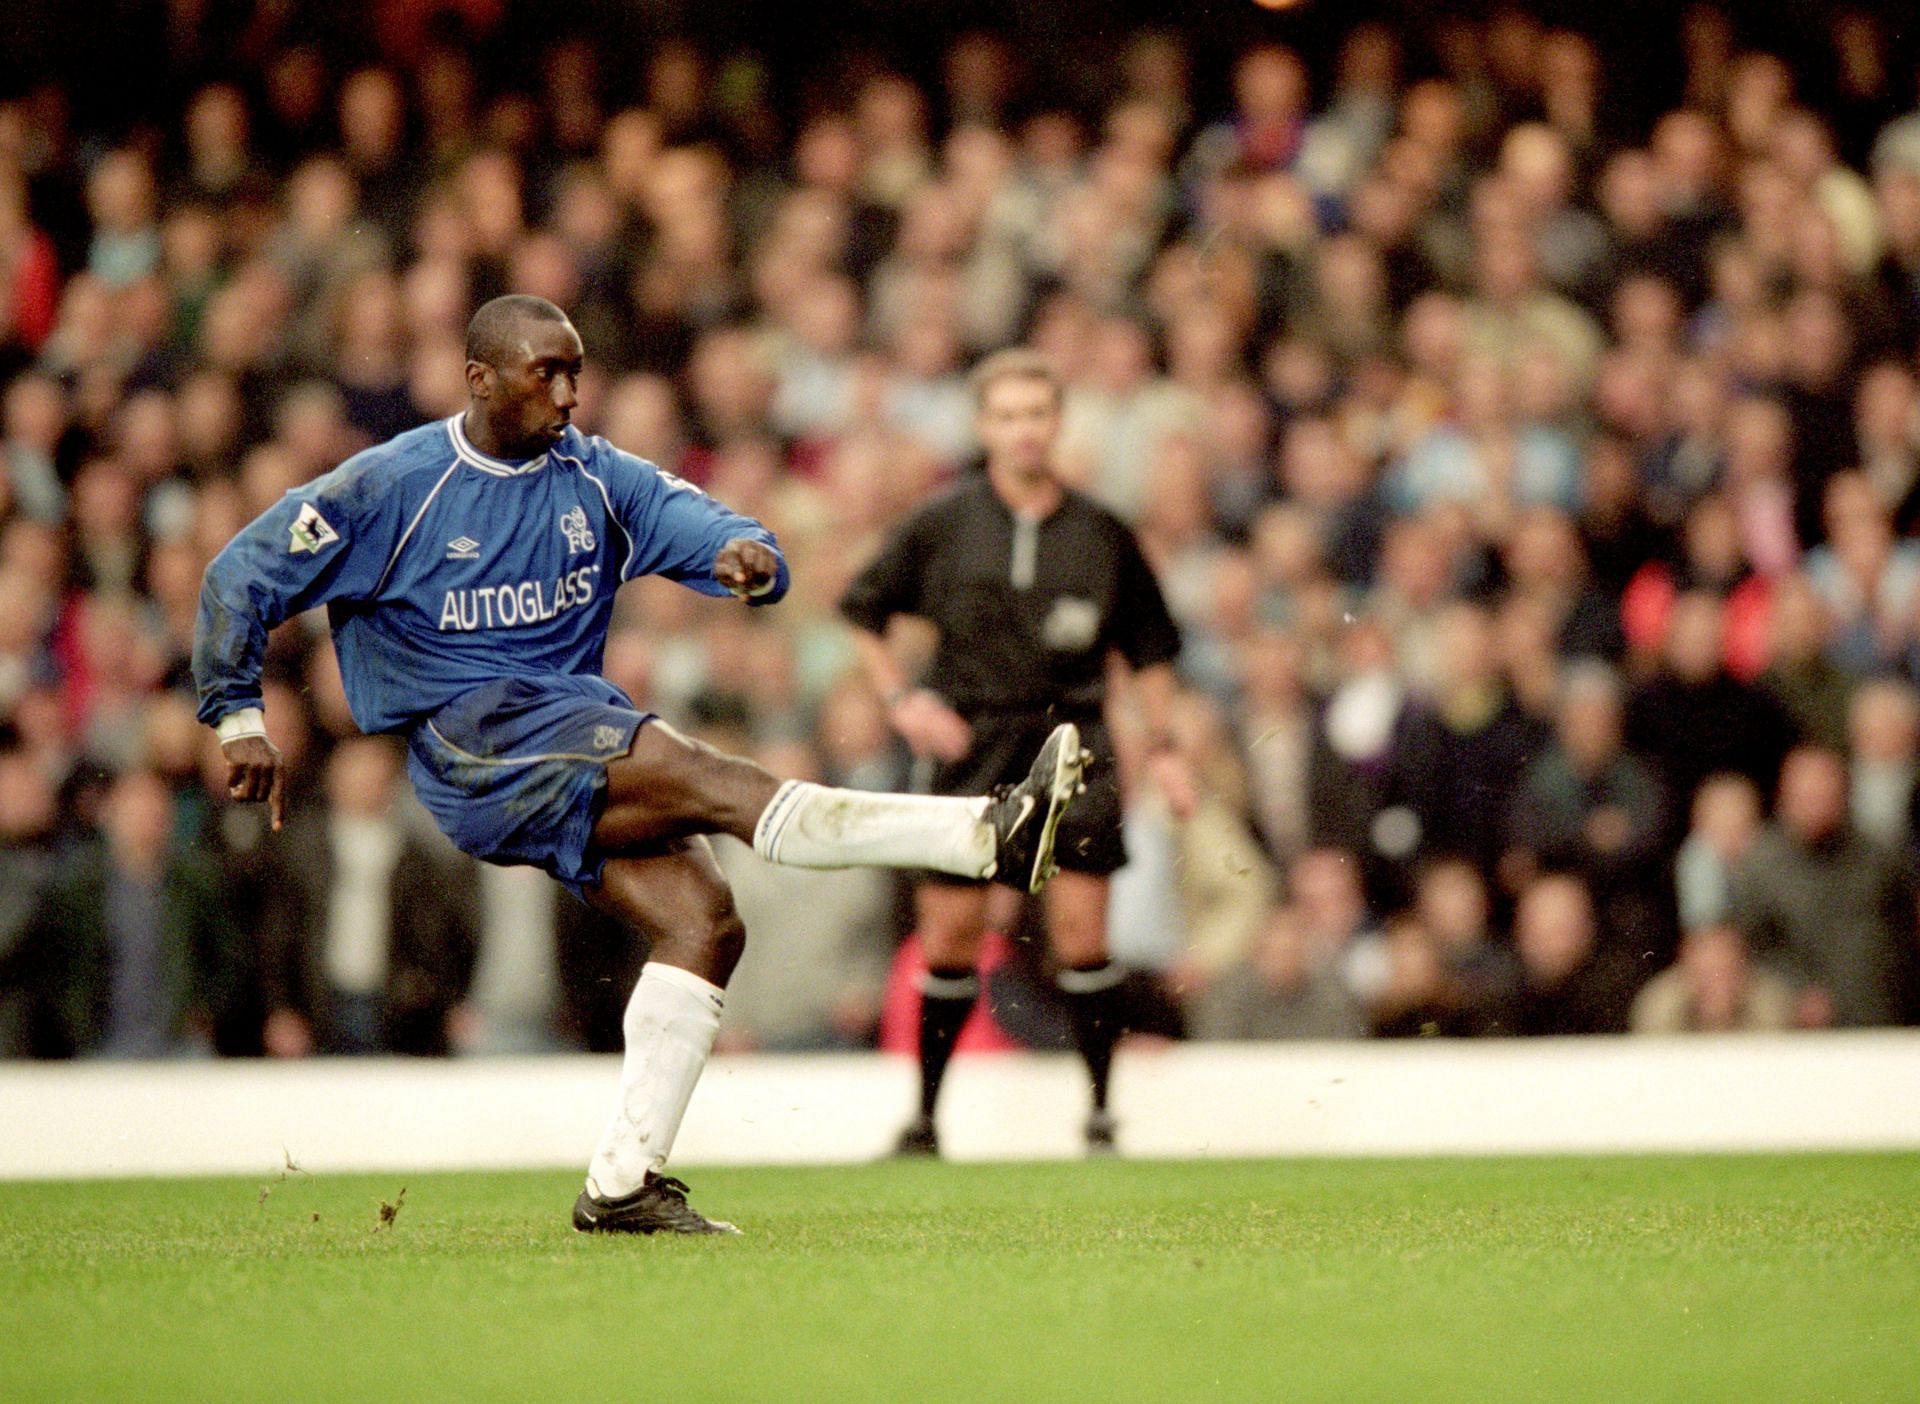 Jimmy Floyd Hasselbaink in action for Chelsea